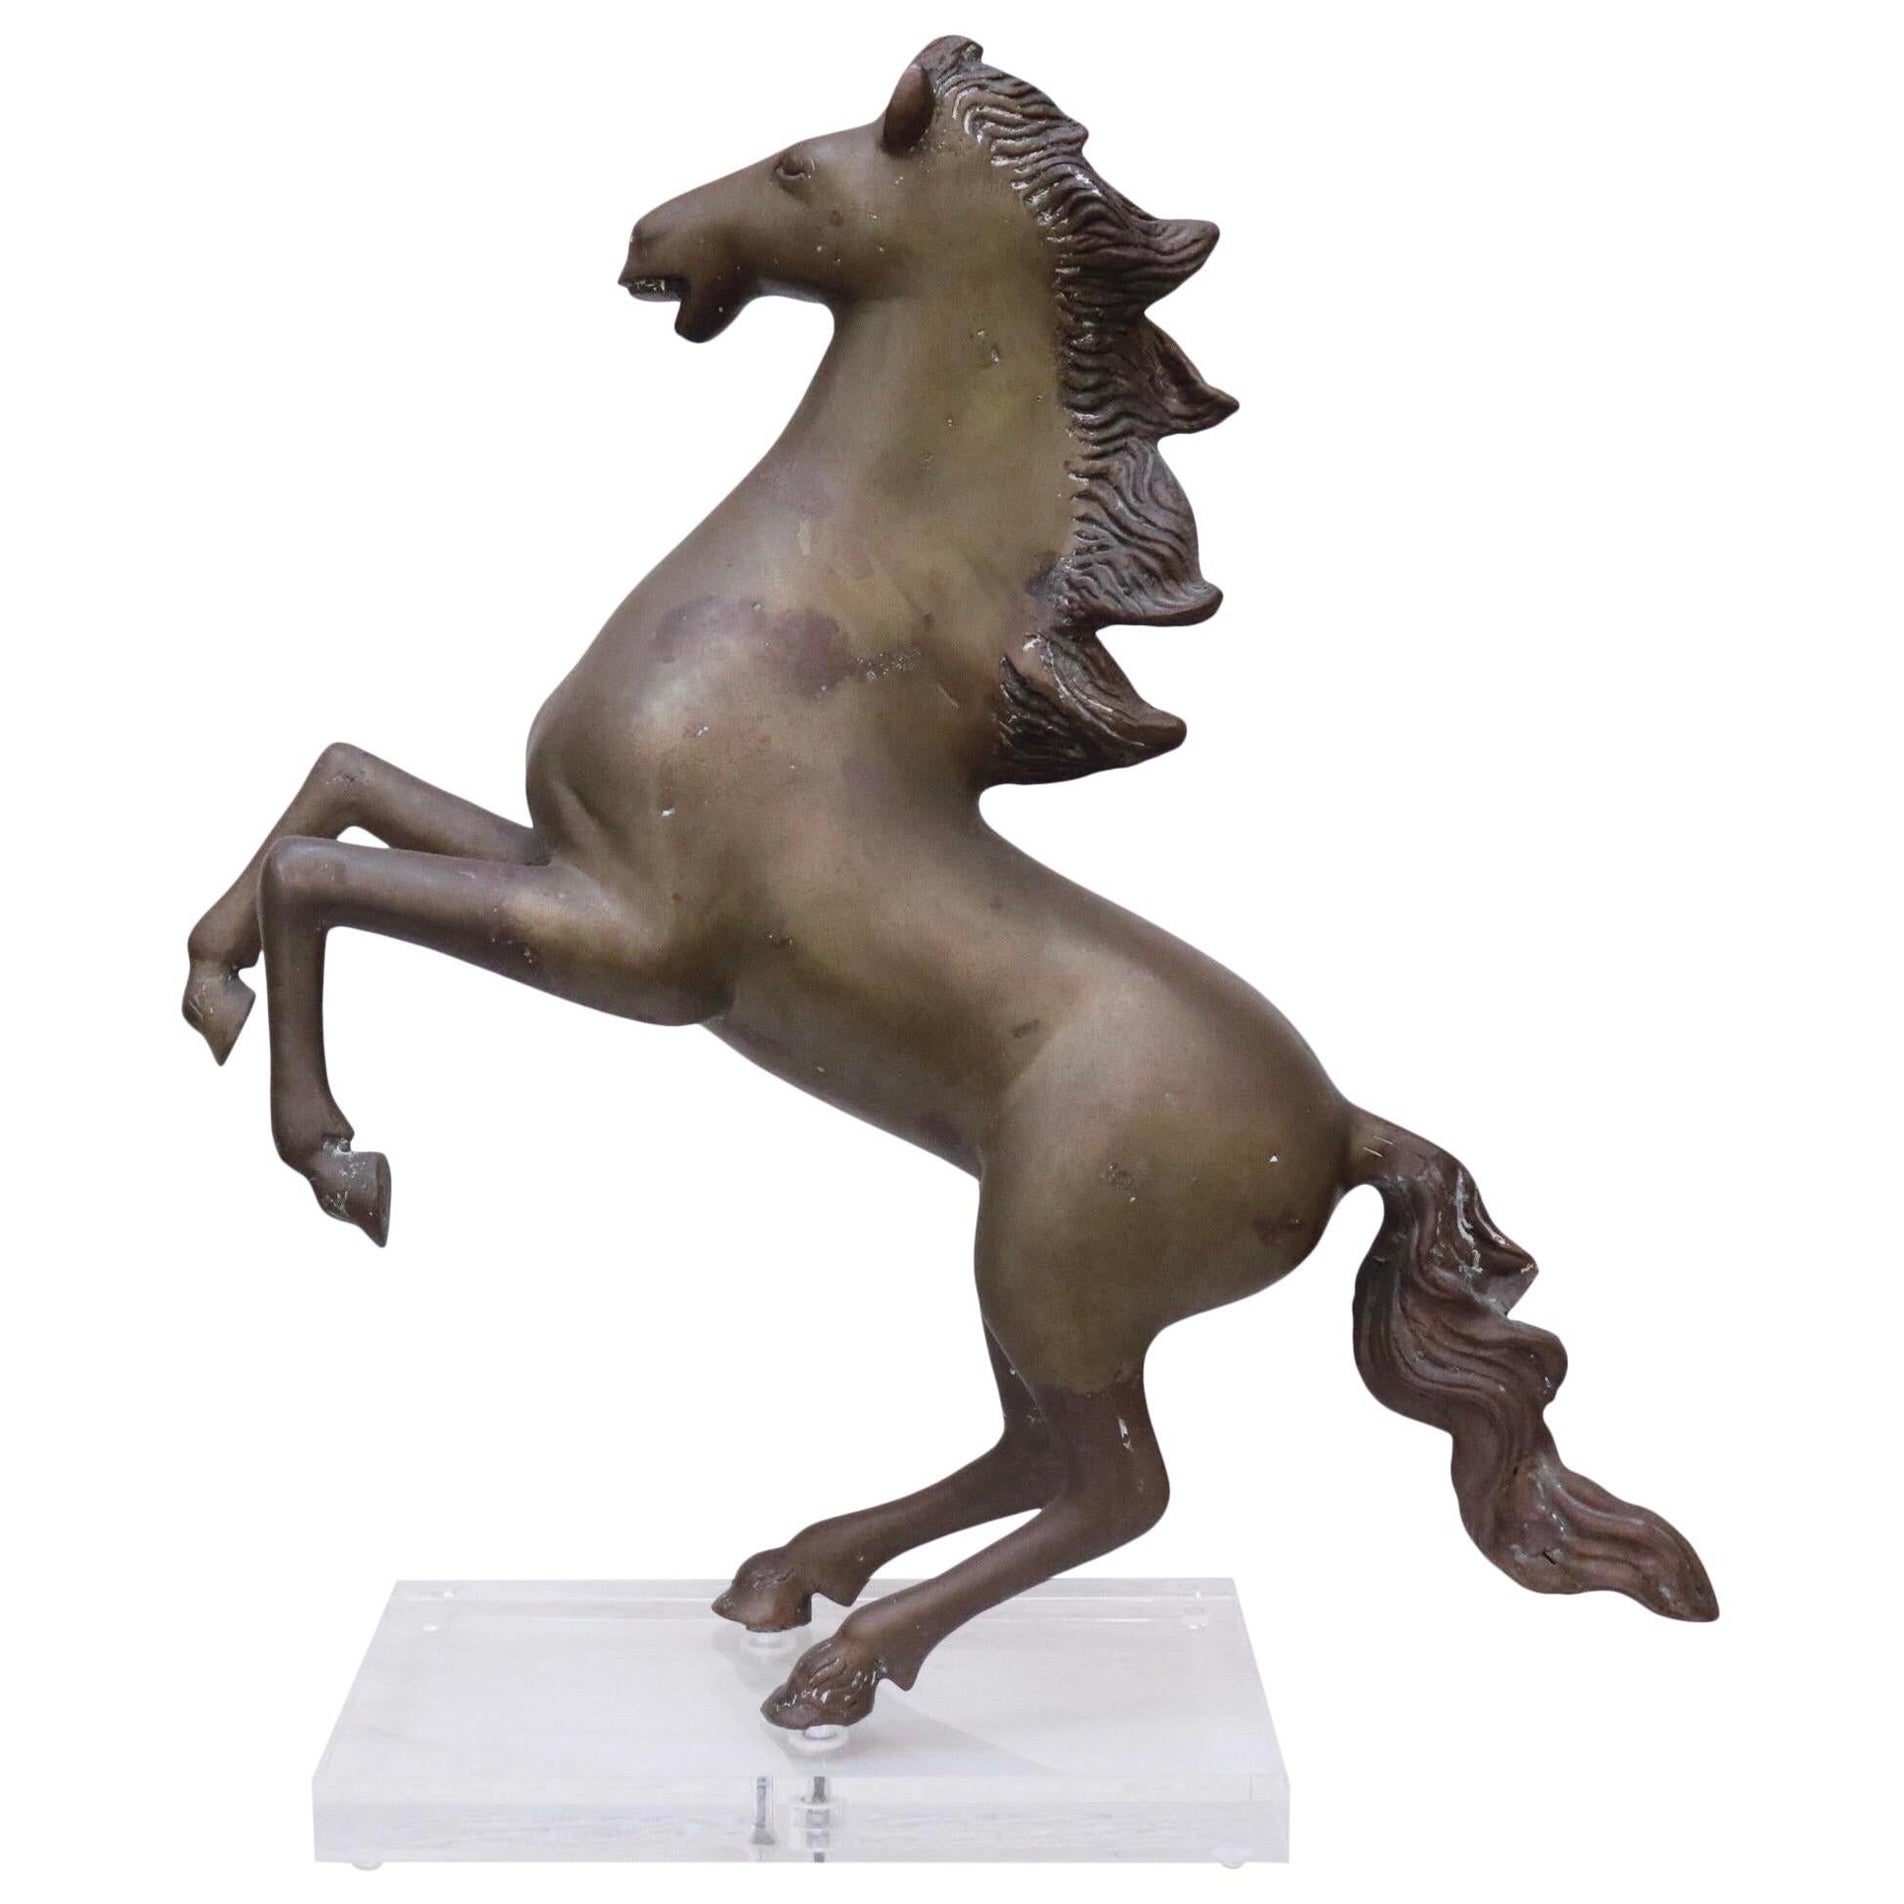 Rearing Horse Sculpture in Brass on Lucite